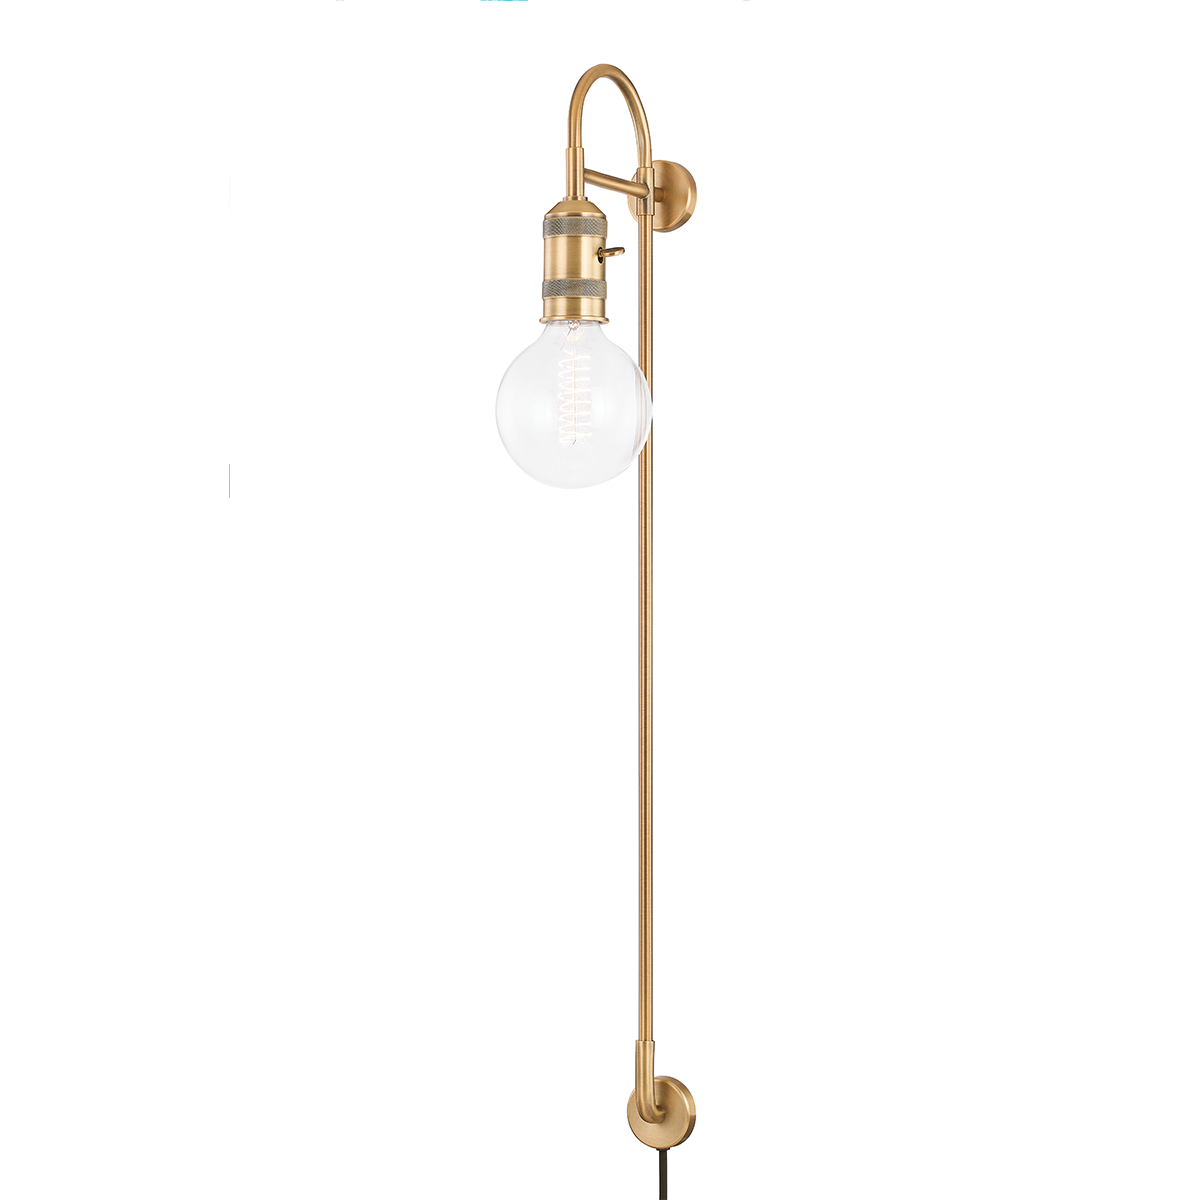 Troy Lighting Dean Plug-in Sconce Plug-in Sconce Troy Lighting PATINA BRASS 5x5x35.5 